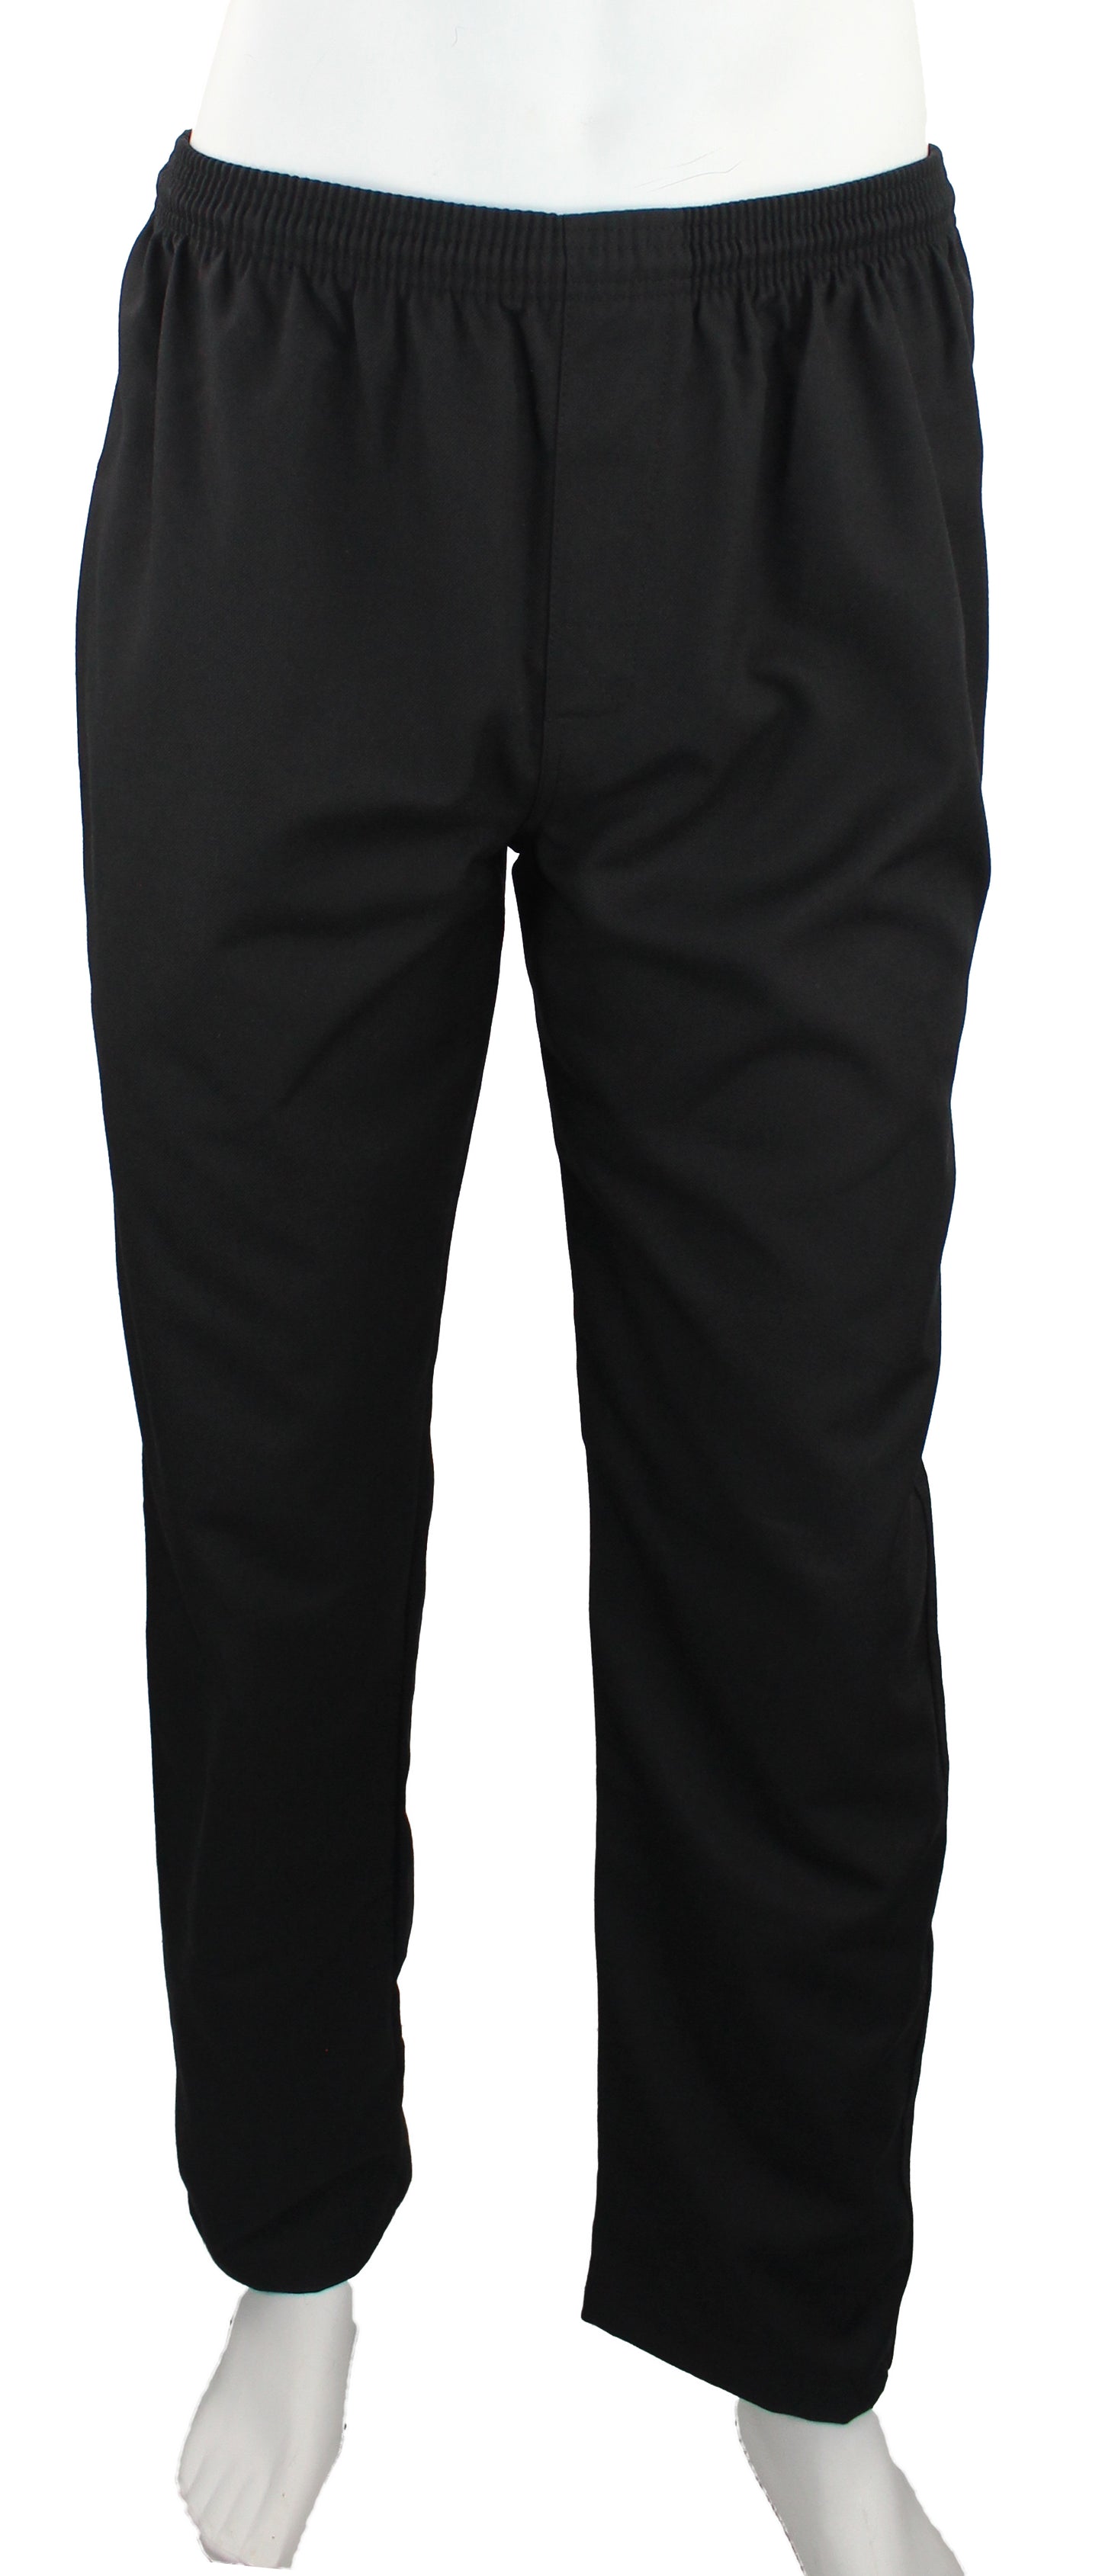 ST ALBANS COLLEGE PV PANT